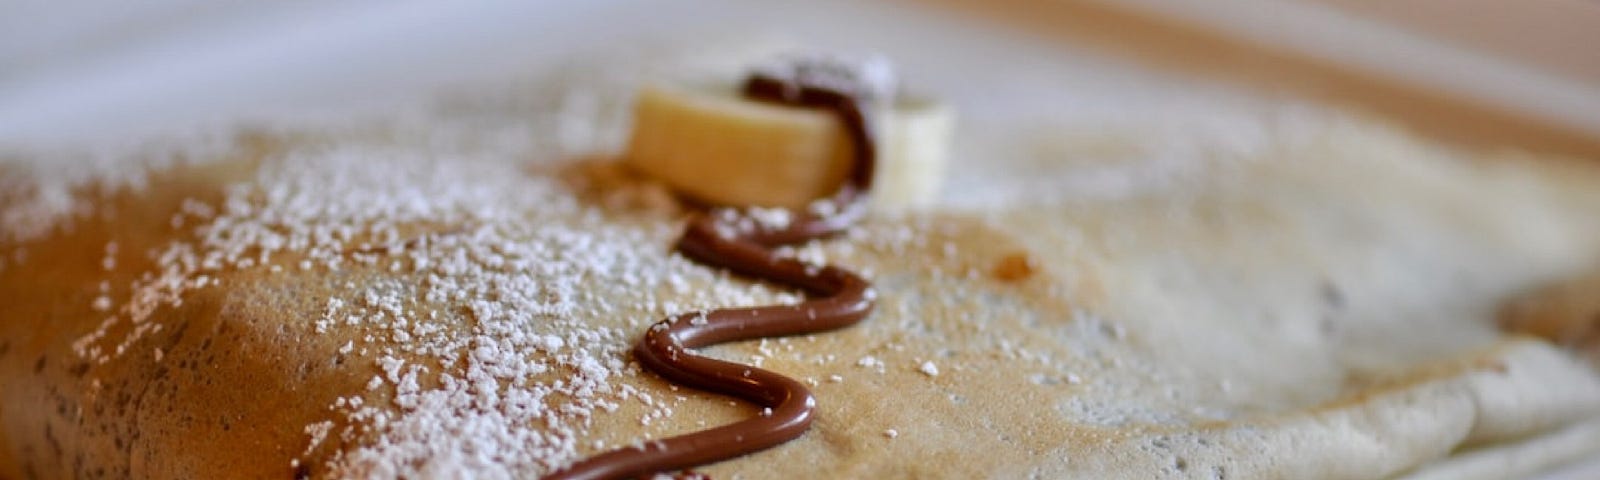 A crepe; the best meal to start your day.